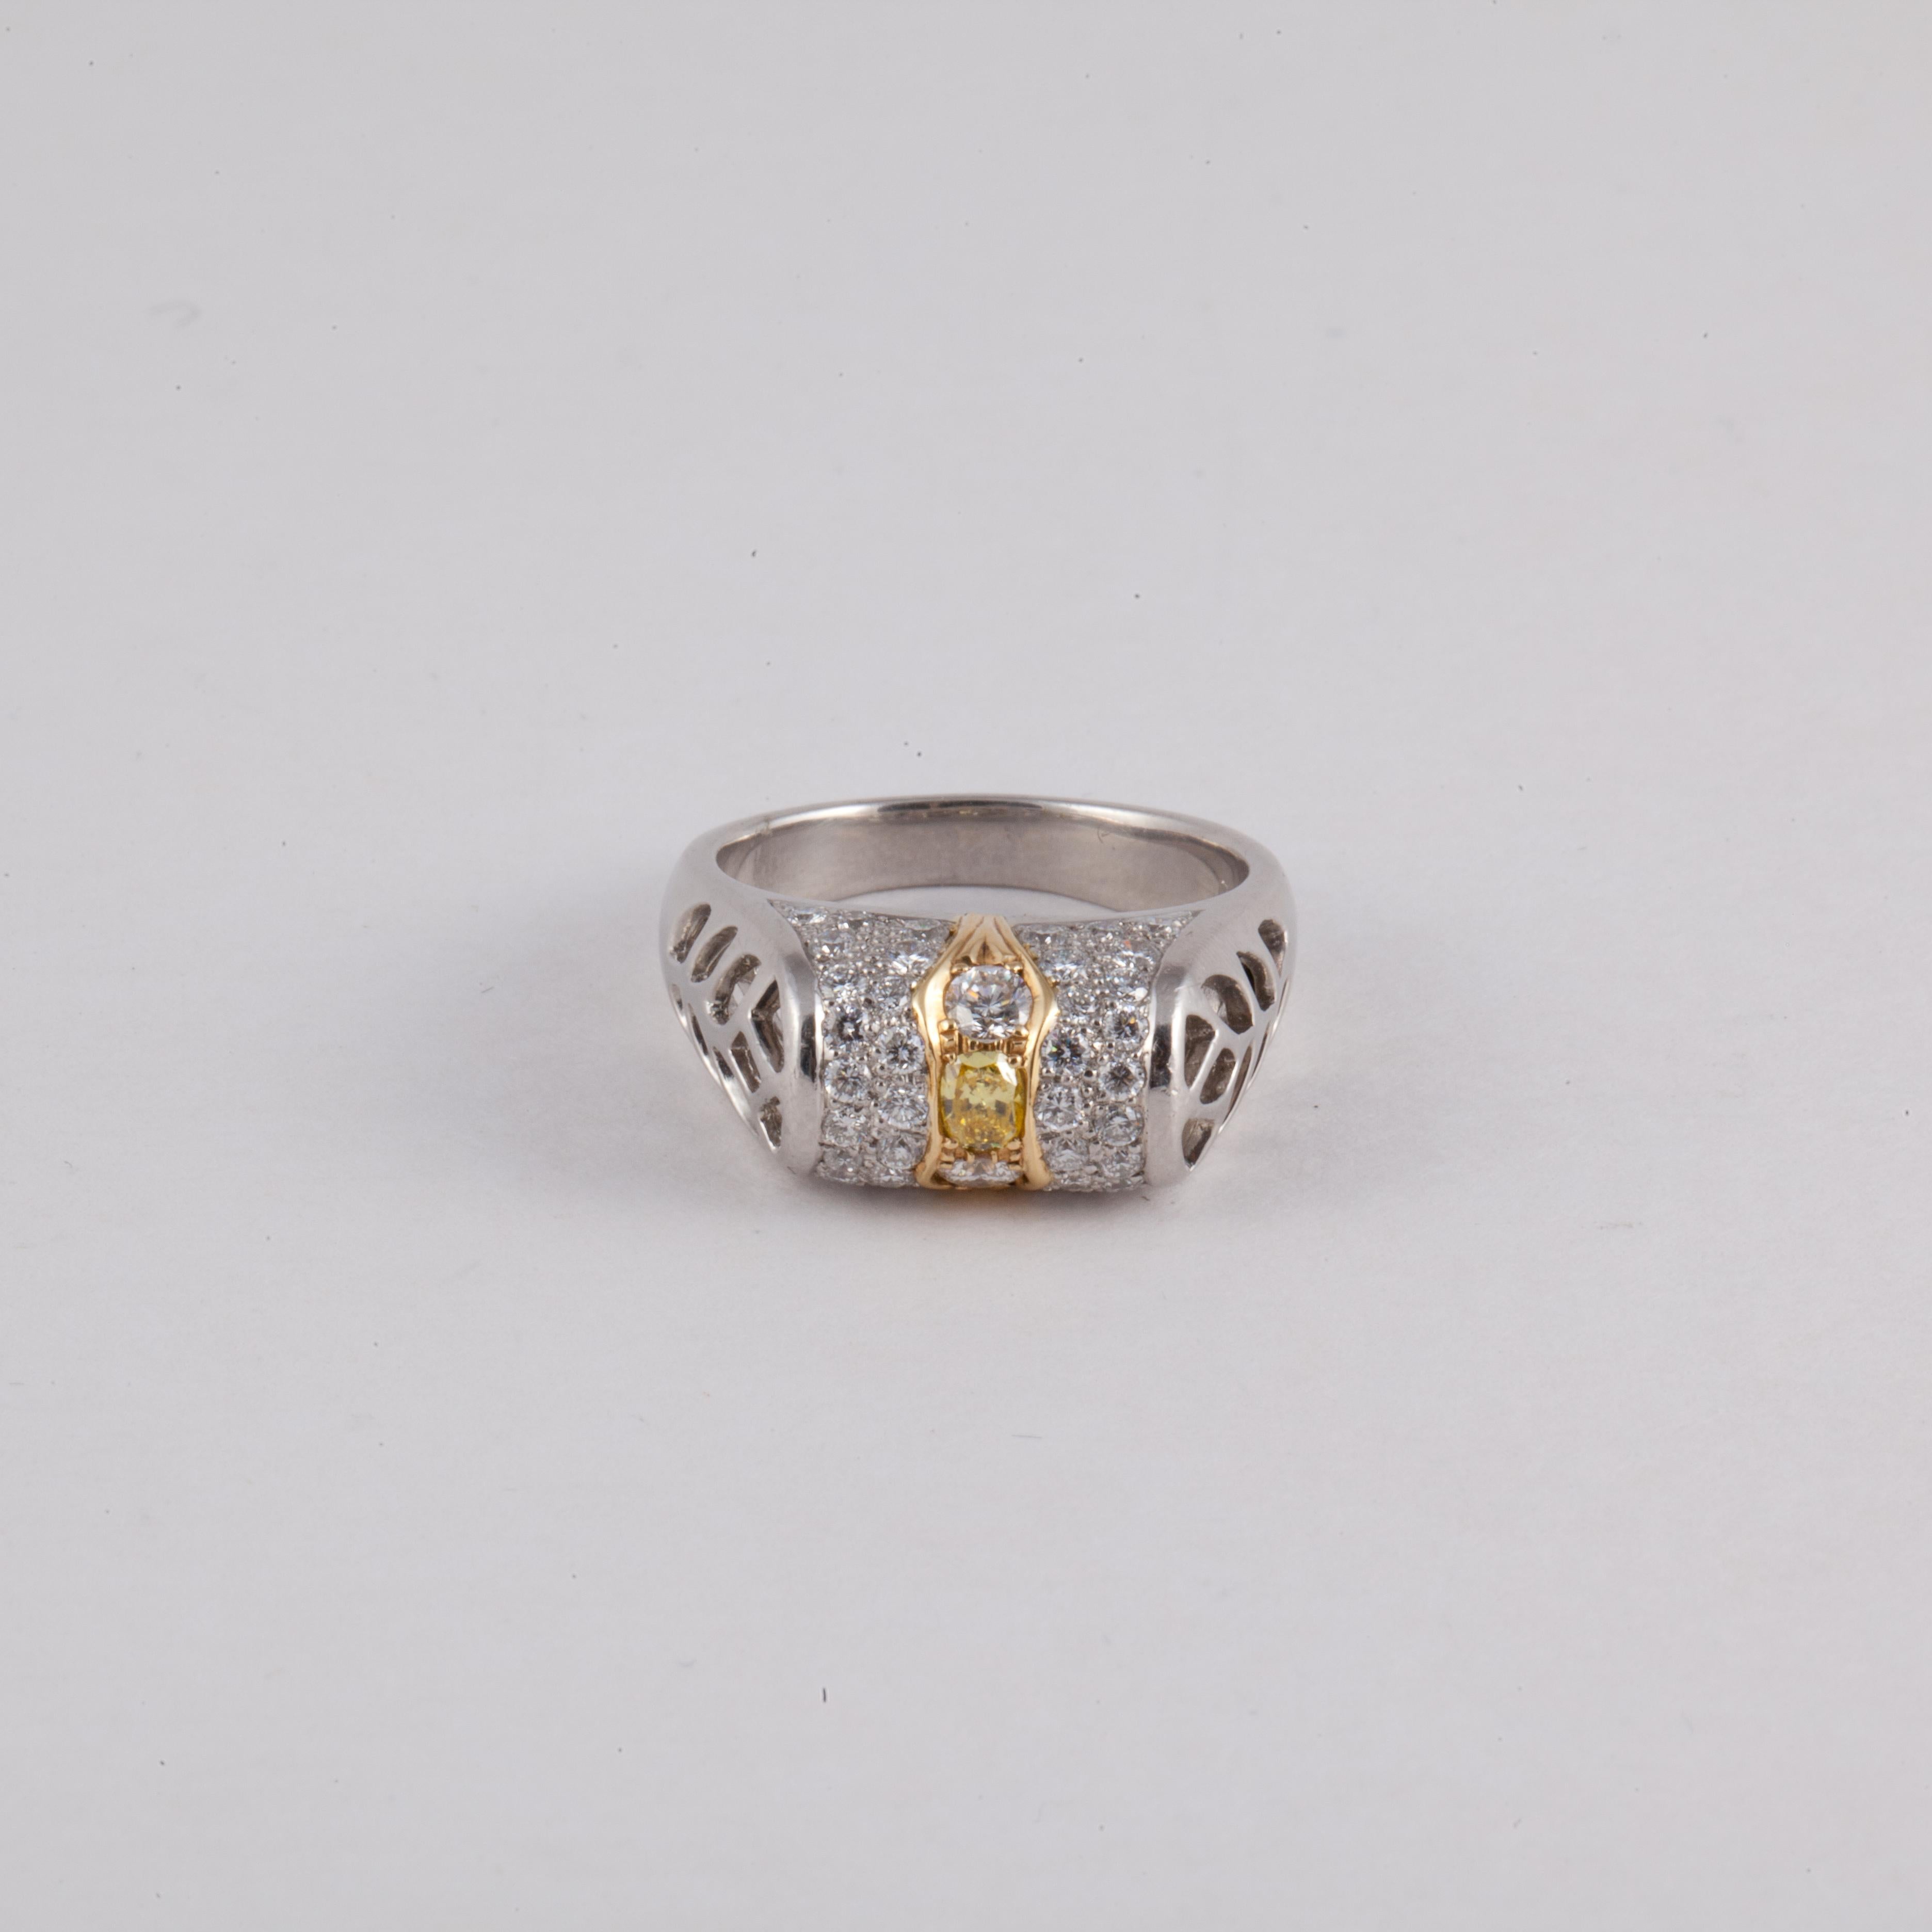 Platinum ring with 18K yellow gold strips on the top featuring an oval canary diamond weighing 0.10 carats.  Surrounding the canary diamond, are 44 round diamonds with a total carat weight of 0.85. Presentation area measures 3/4 inches by 5/16